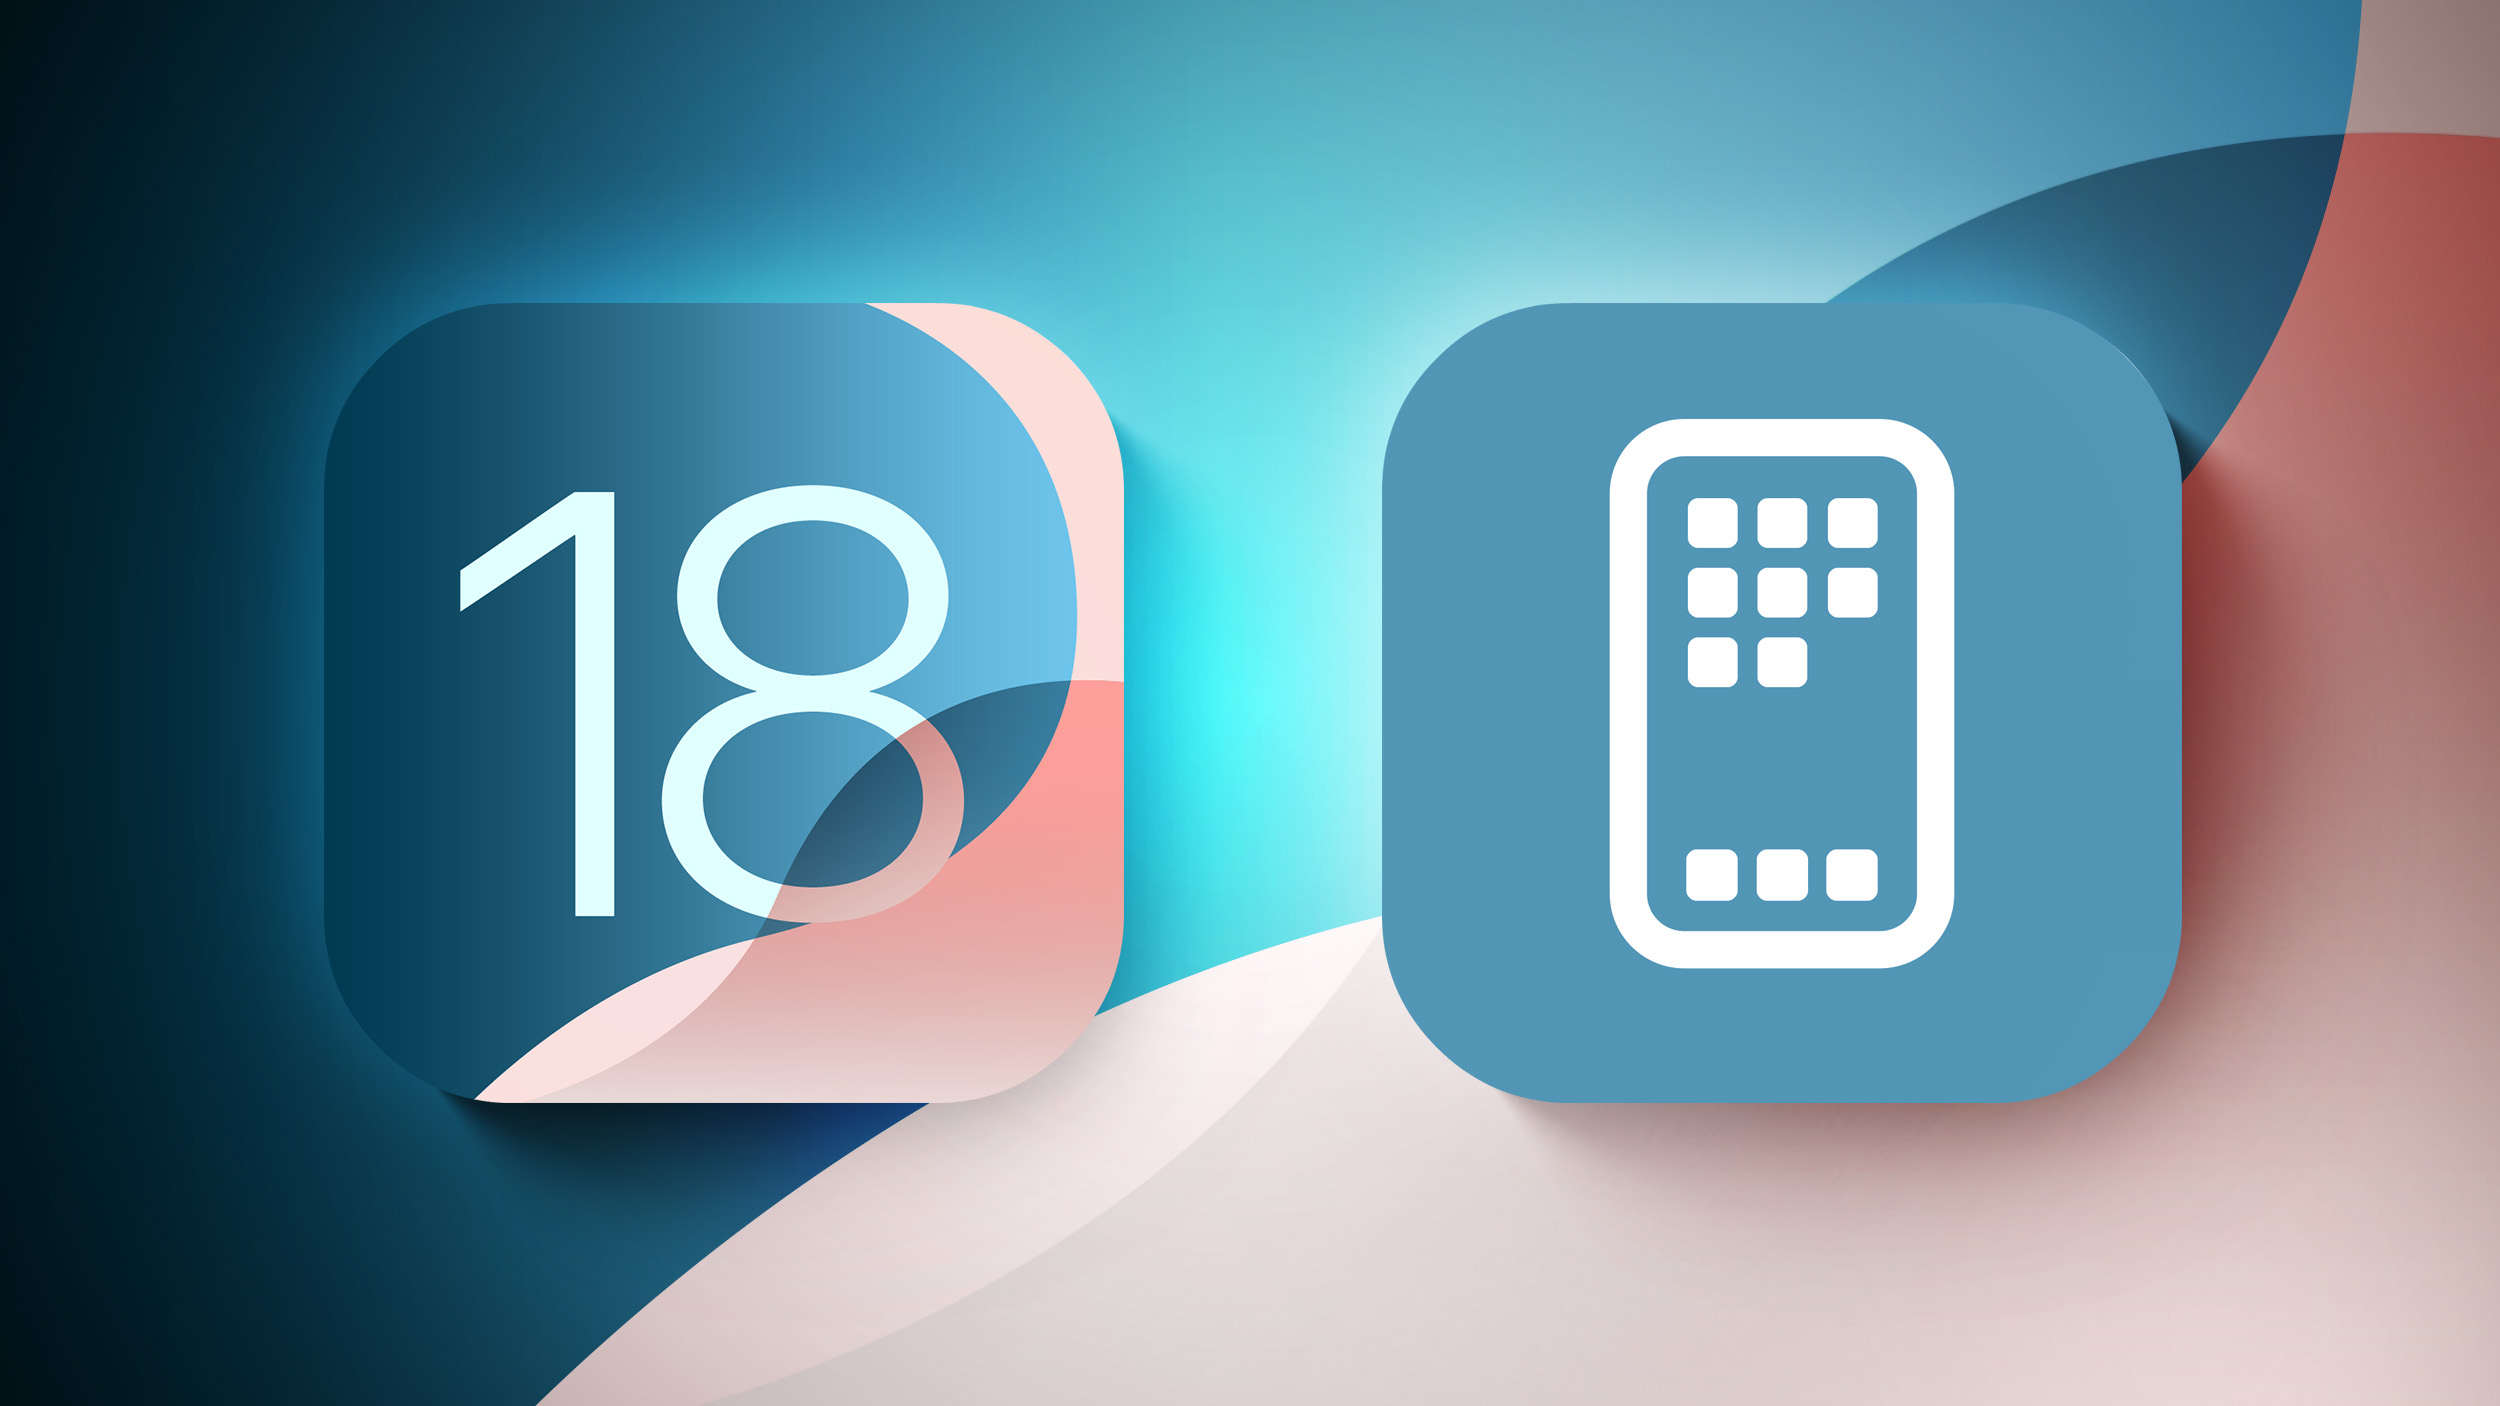 iOS 18: 10 New Home Screen and Lock Screen Features